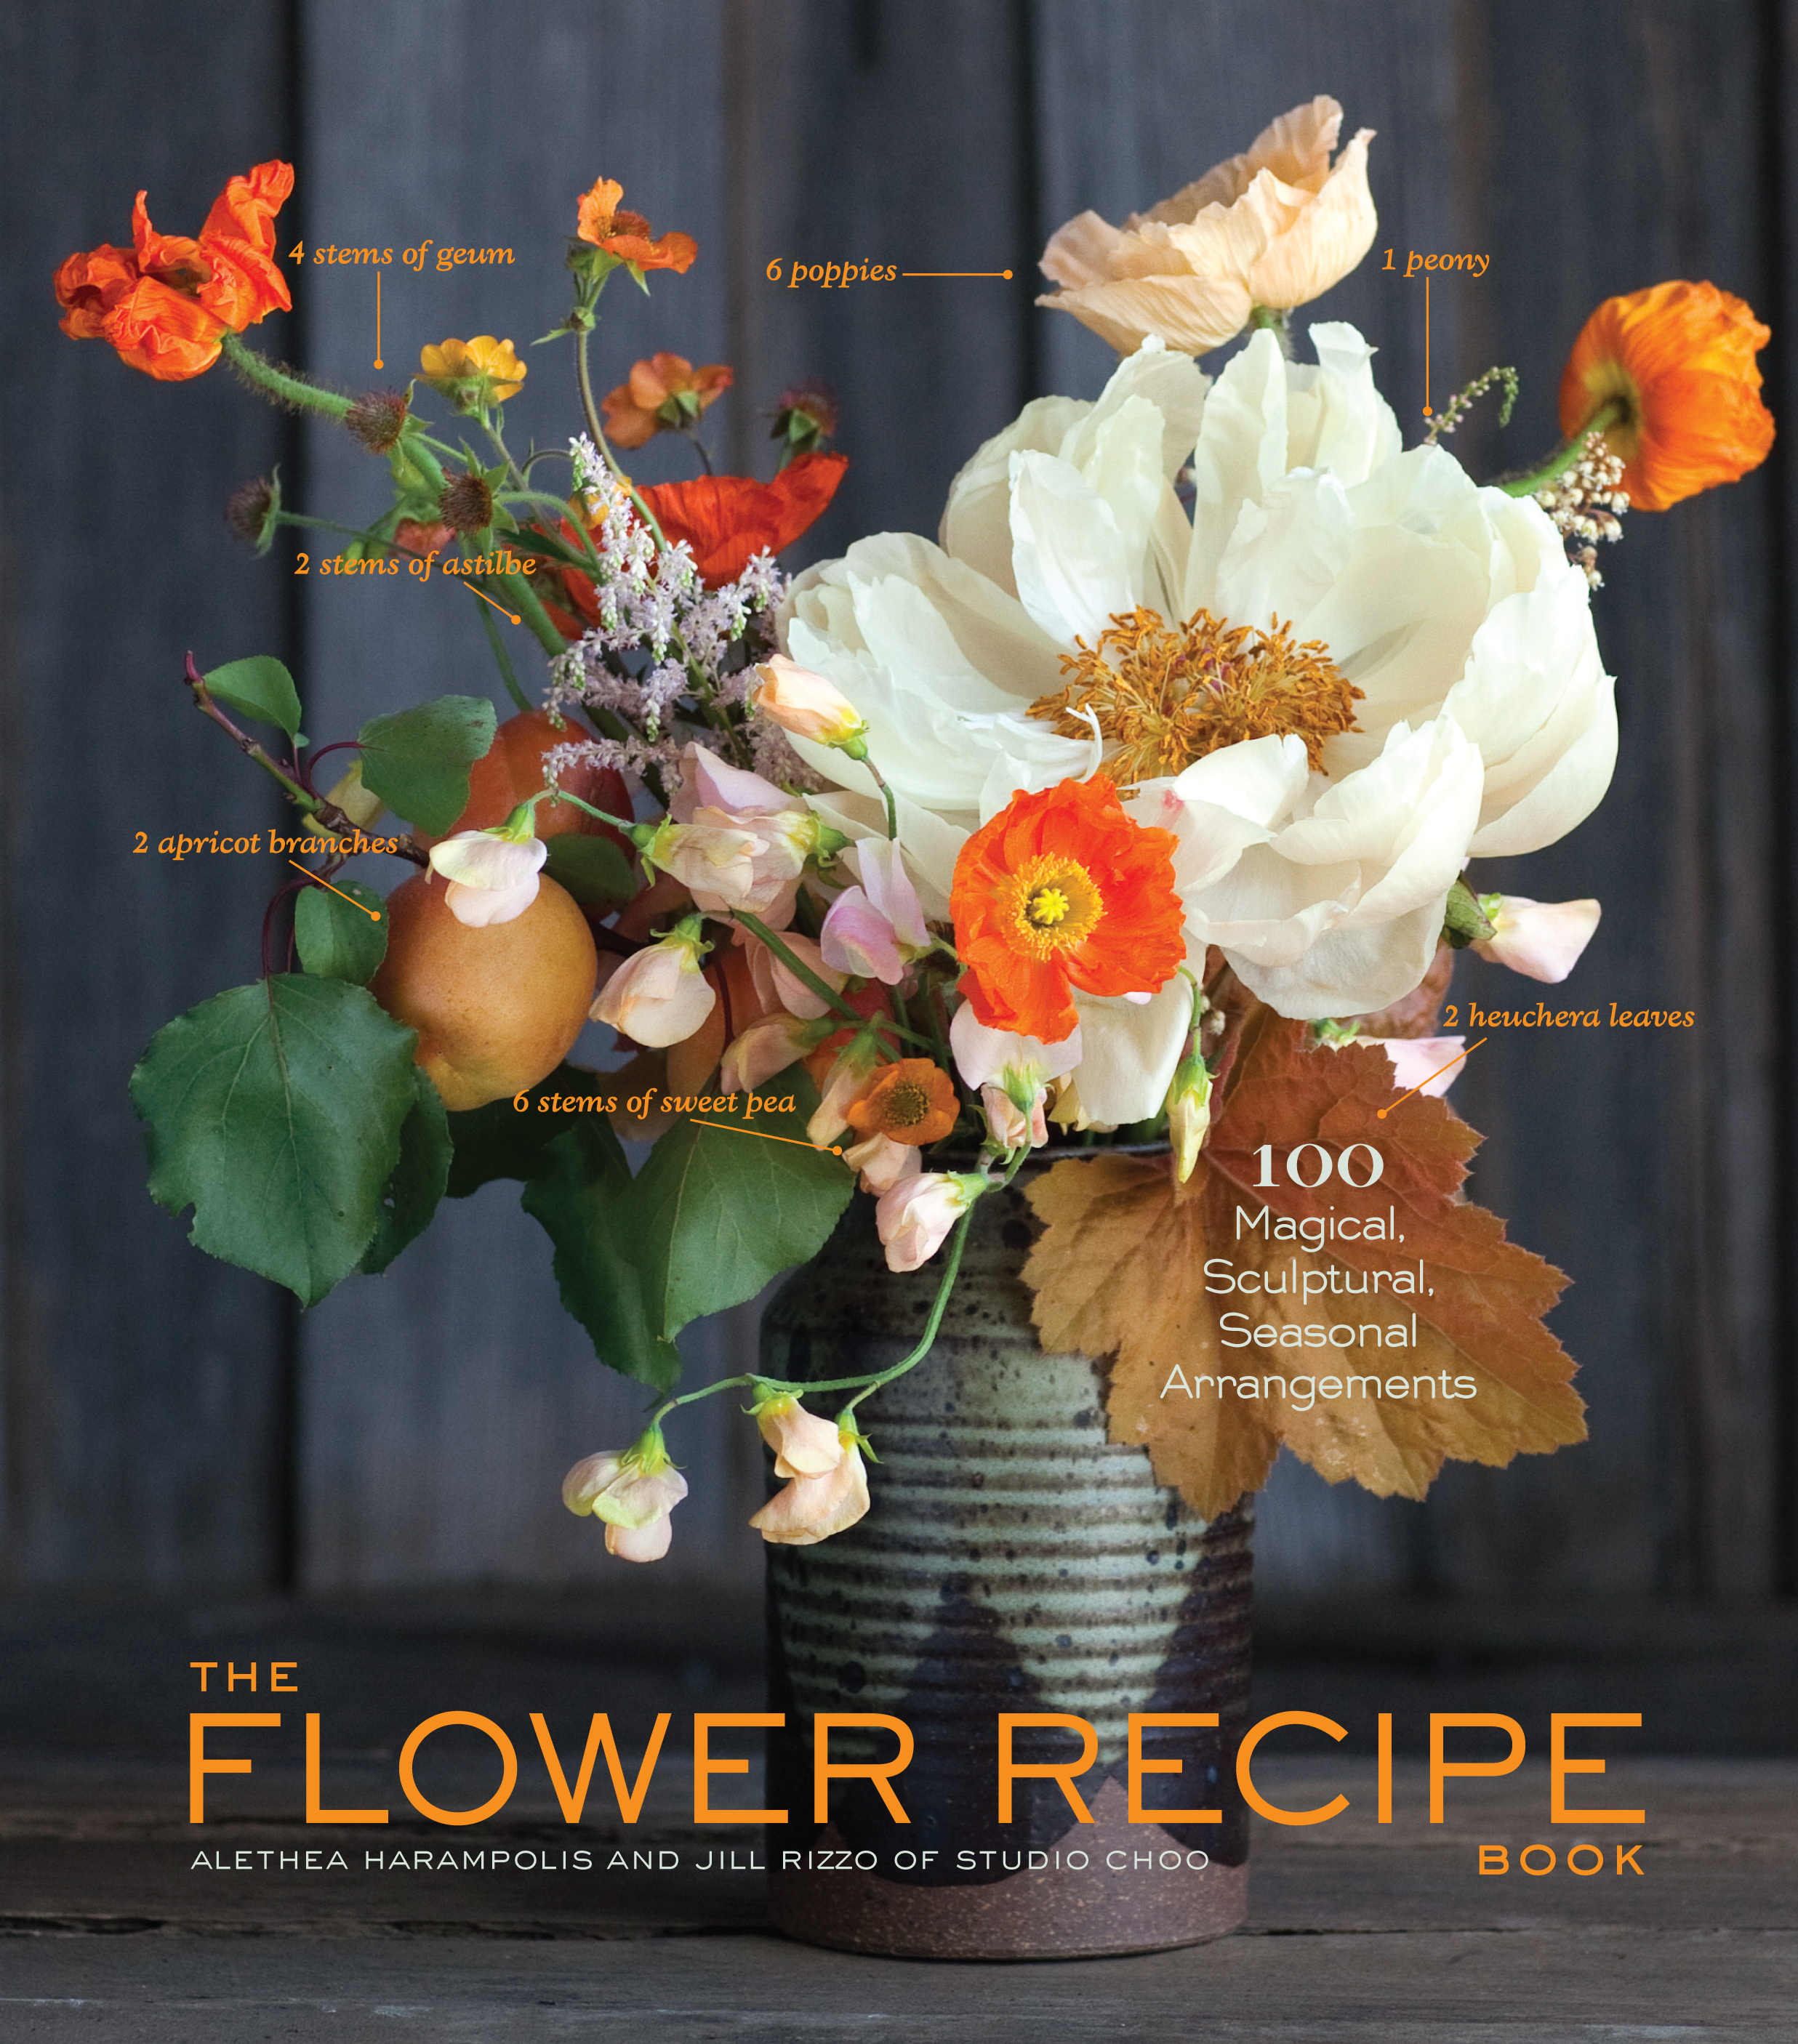 The　Alethea　Book　by　Book　Flower　Hachette　Harampolis　Recipe　Group